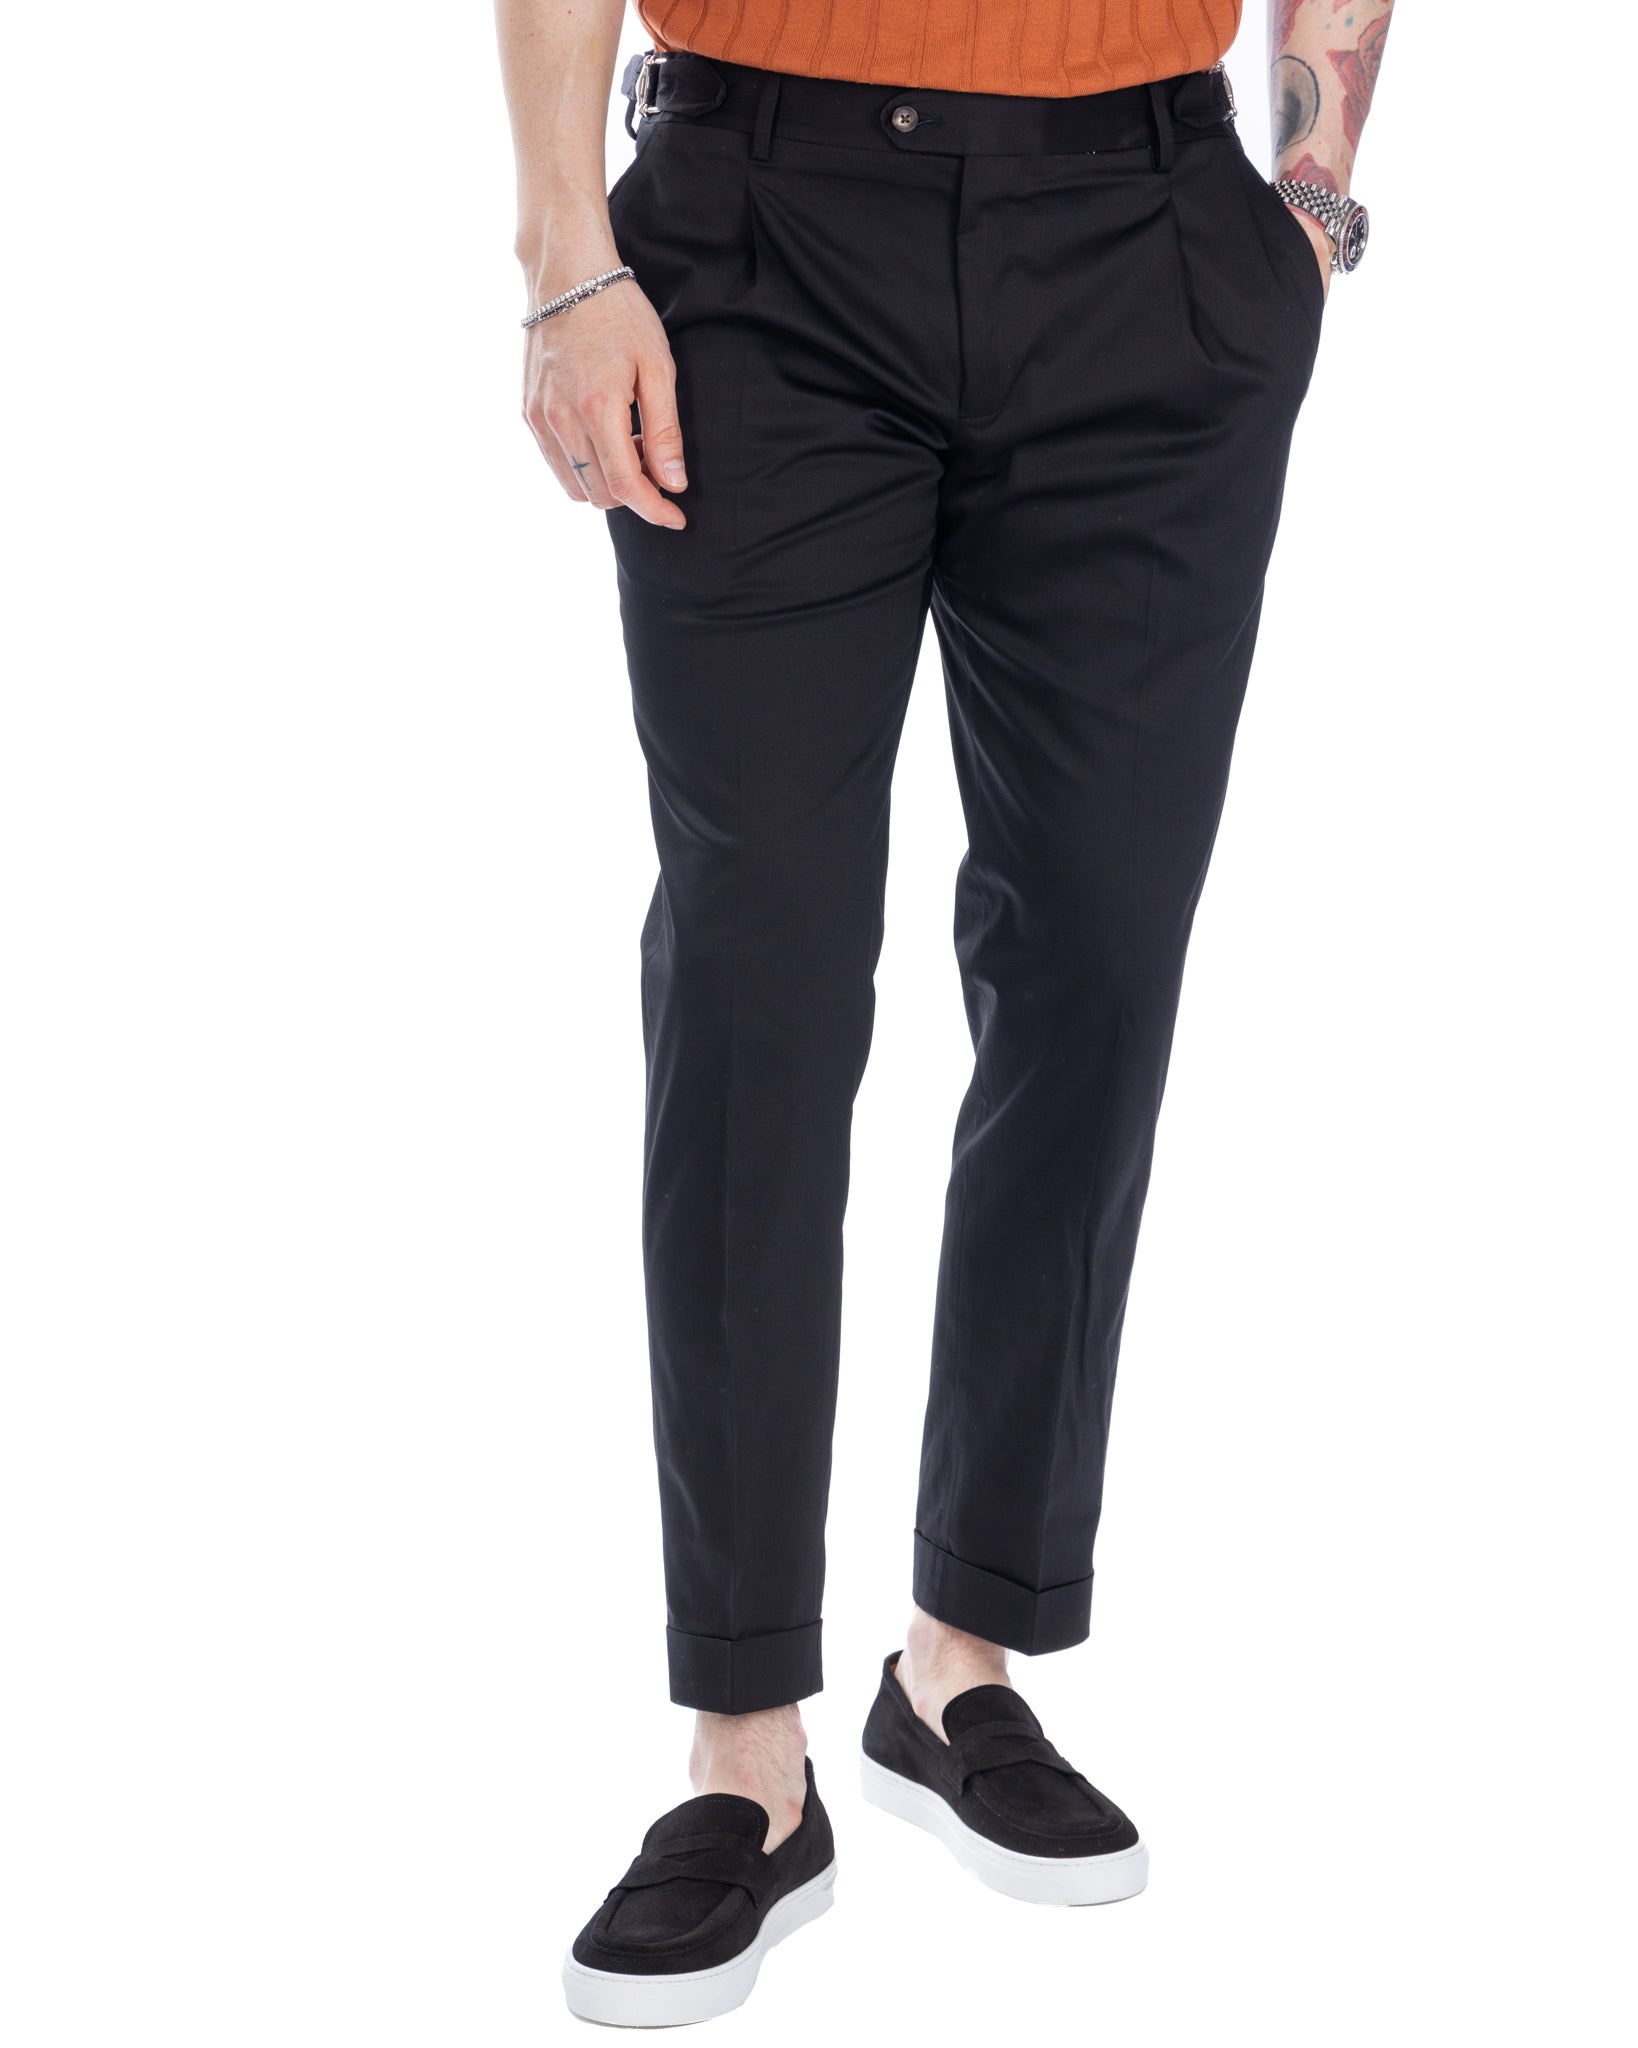 James - black high-waisted trousers with buckles